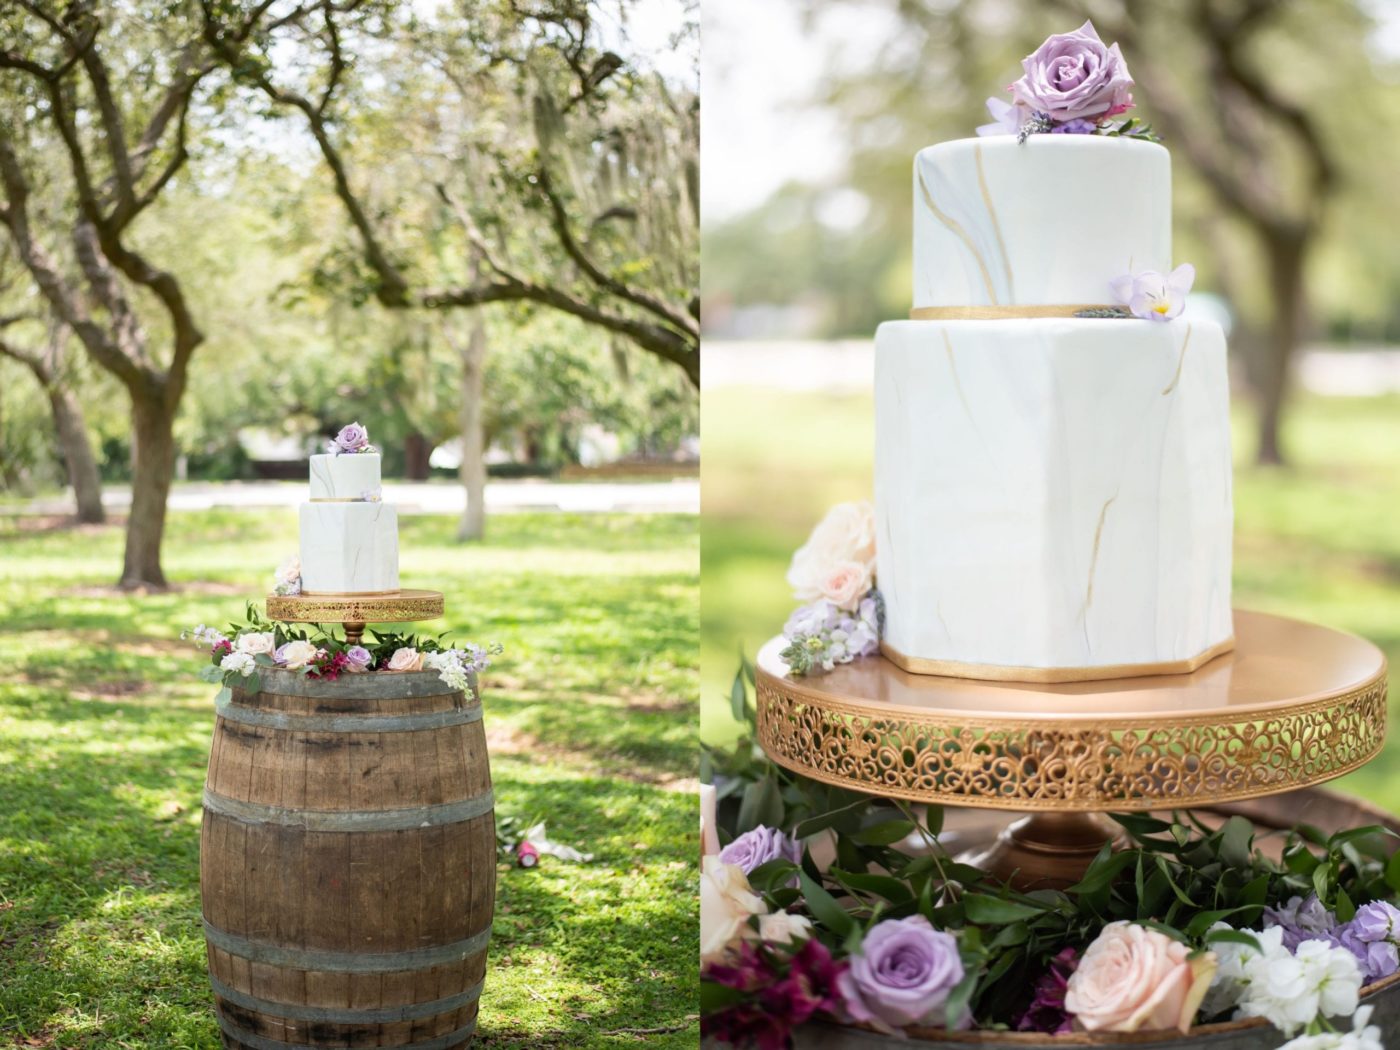 marble wedding cake in gold on a wooden barrel